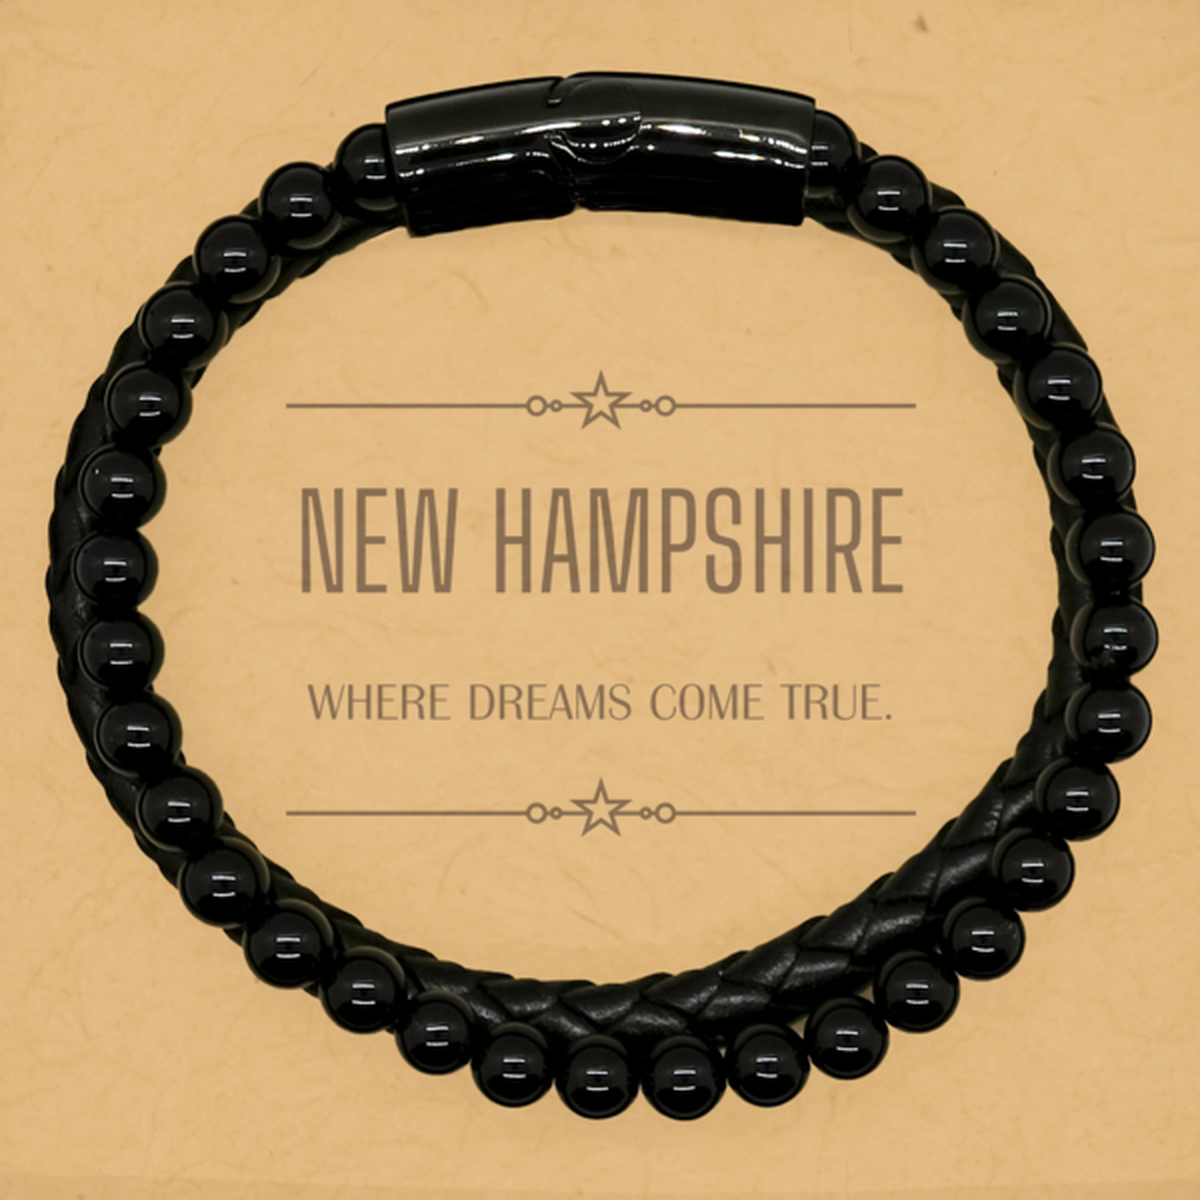 Love New Hampshire State Stone Leather Bracelets, New Hampshire Where dreams come true, Birthday Inspirational Gifts For New Hampshire Men, Women, Friends